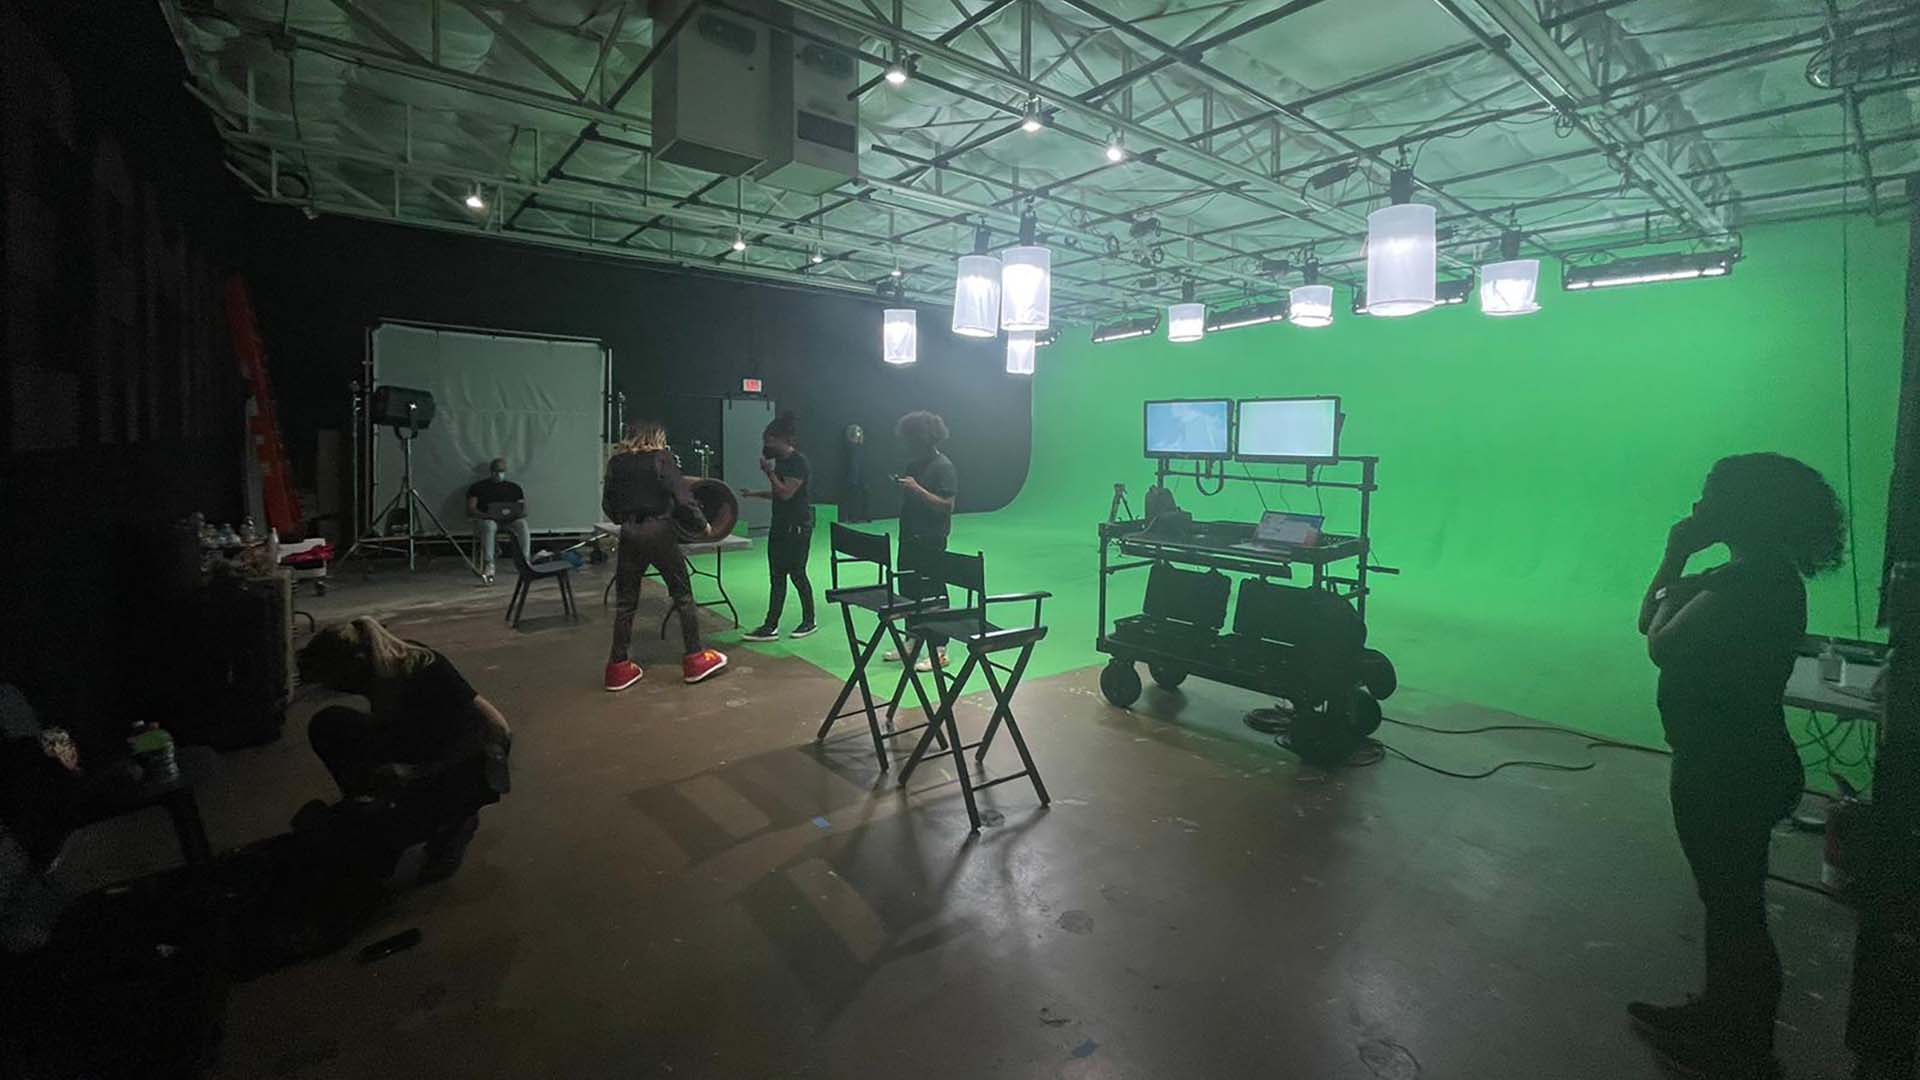 Crew working on a production inside a large green screen studio